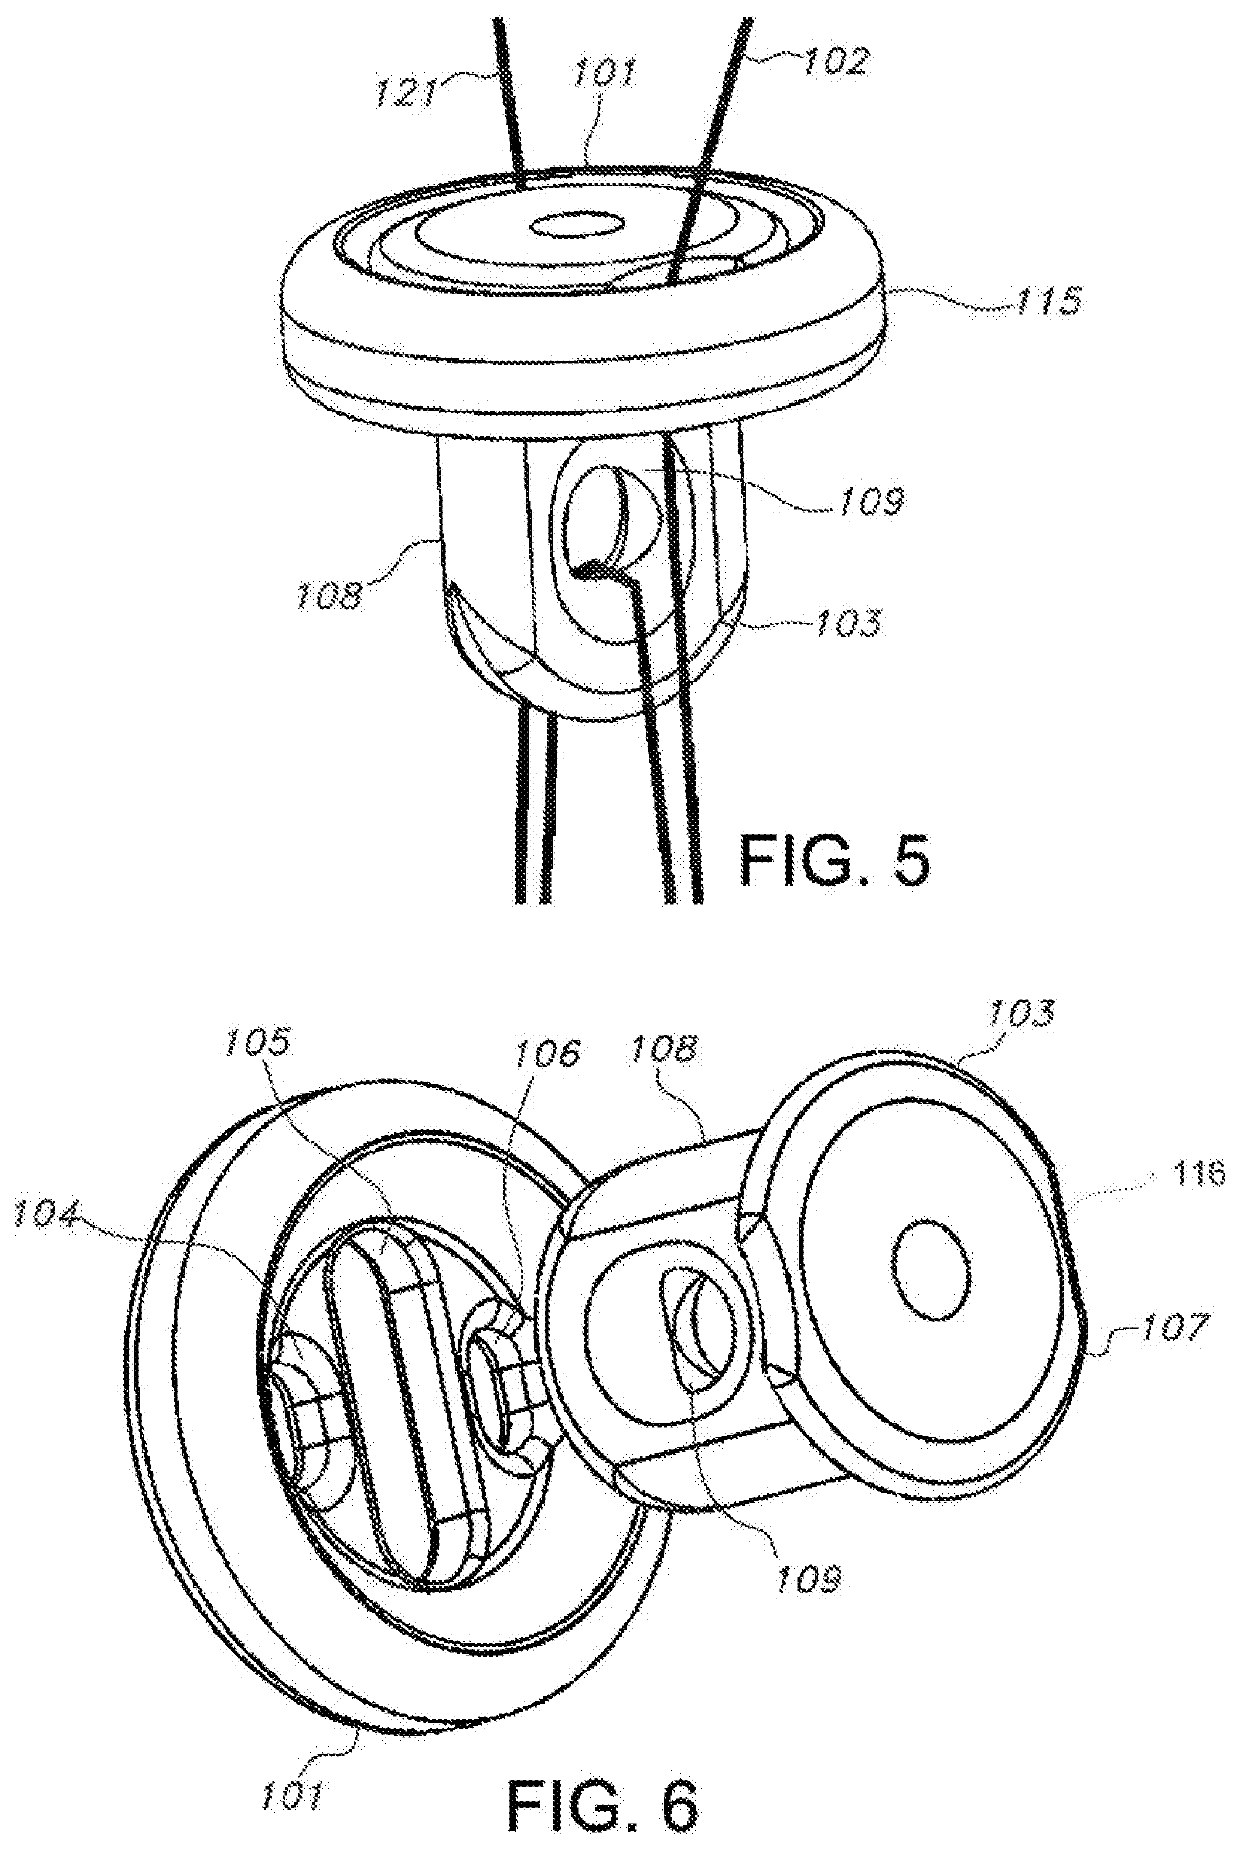 Knotless orthopedic stabilization system